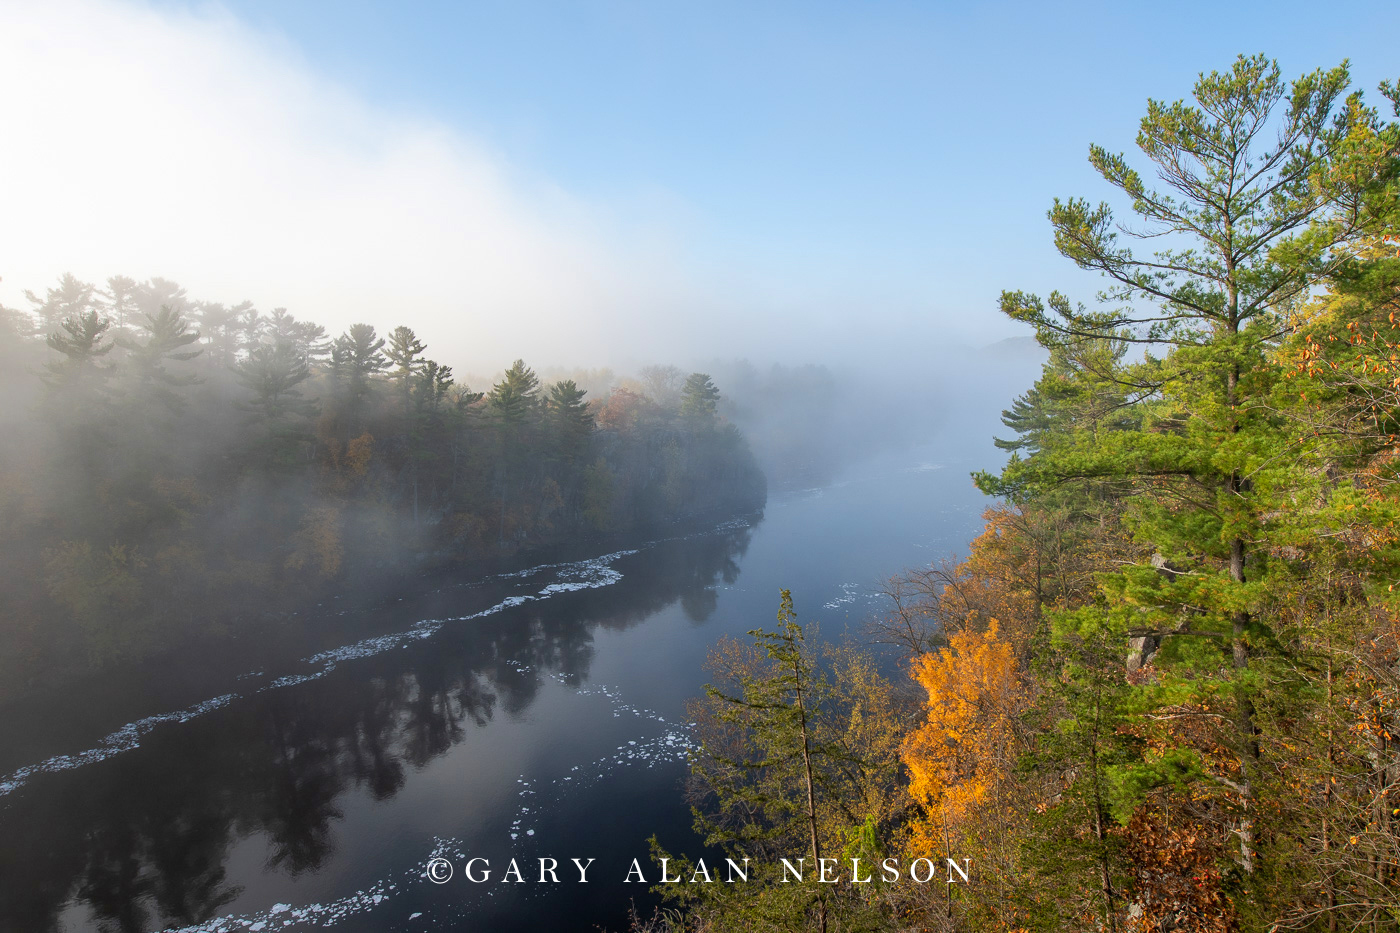 Sunrise, autum and fog over the St. Croix River, St. Croix National and Scenic River, Minnesota/Wisconsin